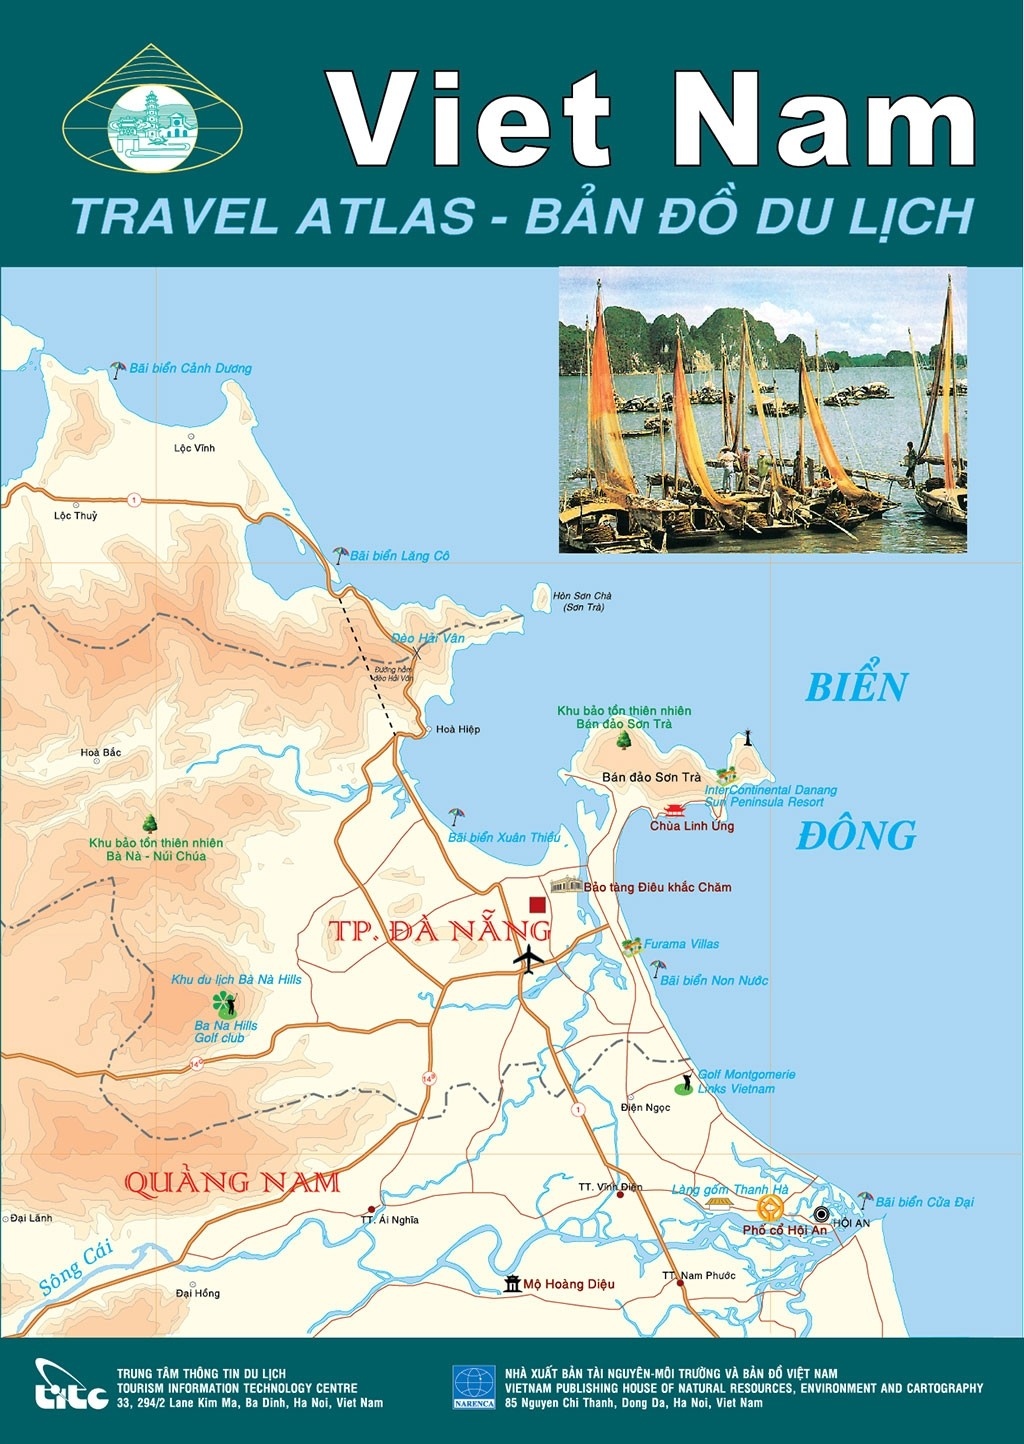 tourists can discover nation through latest vietnam travel atlas picture 1